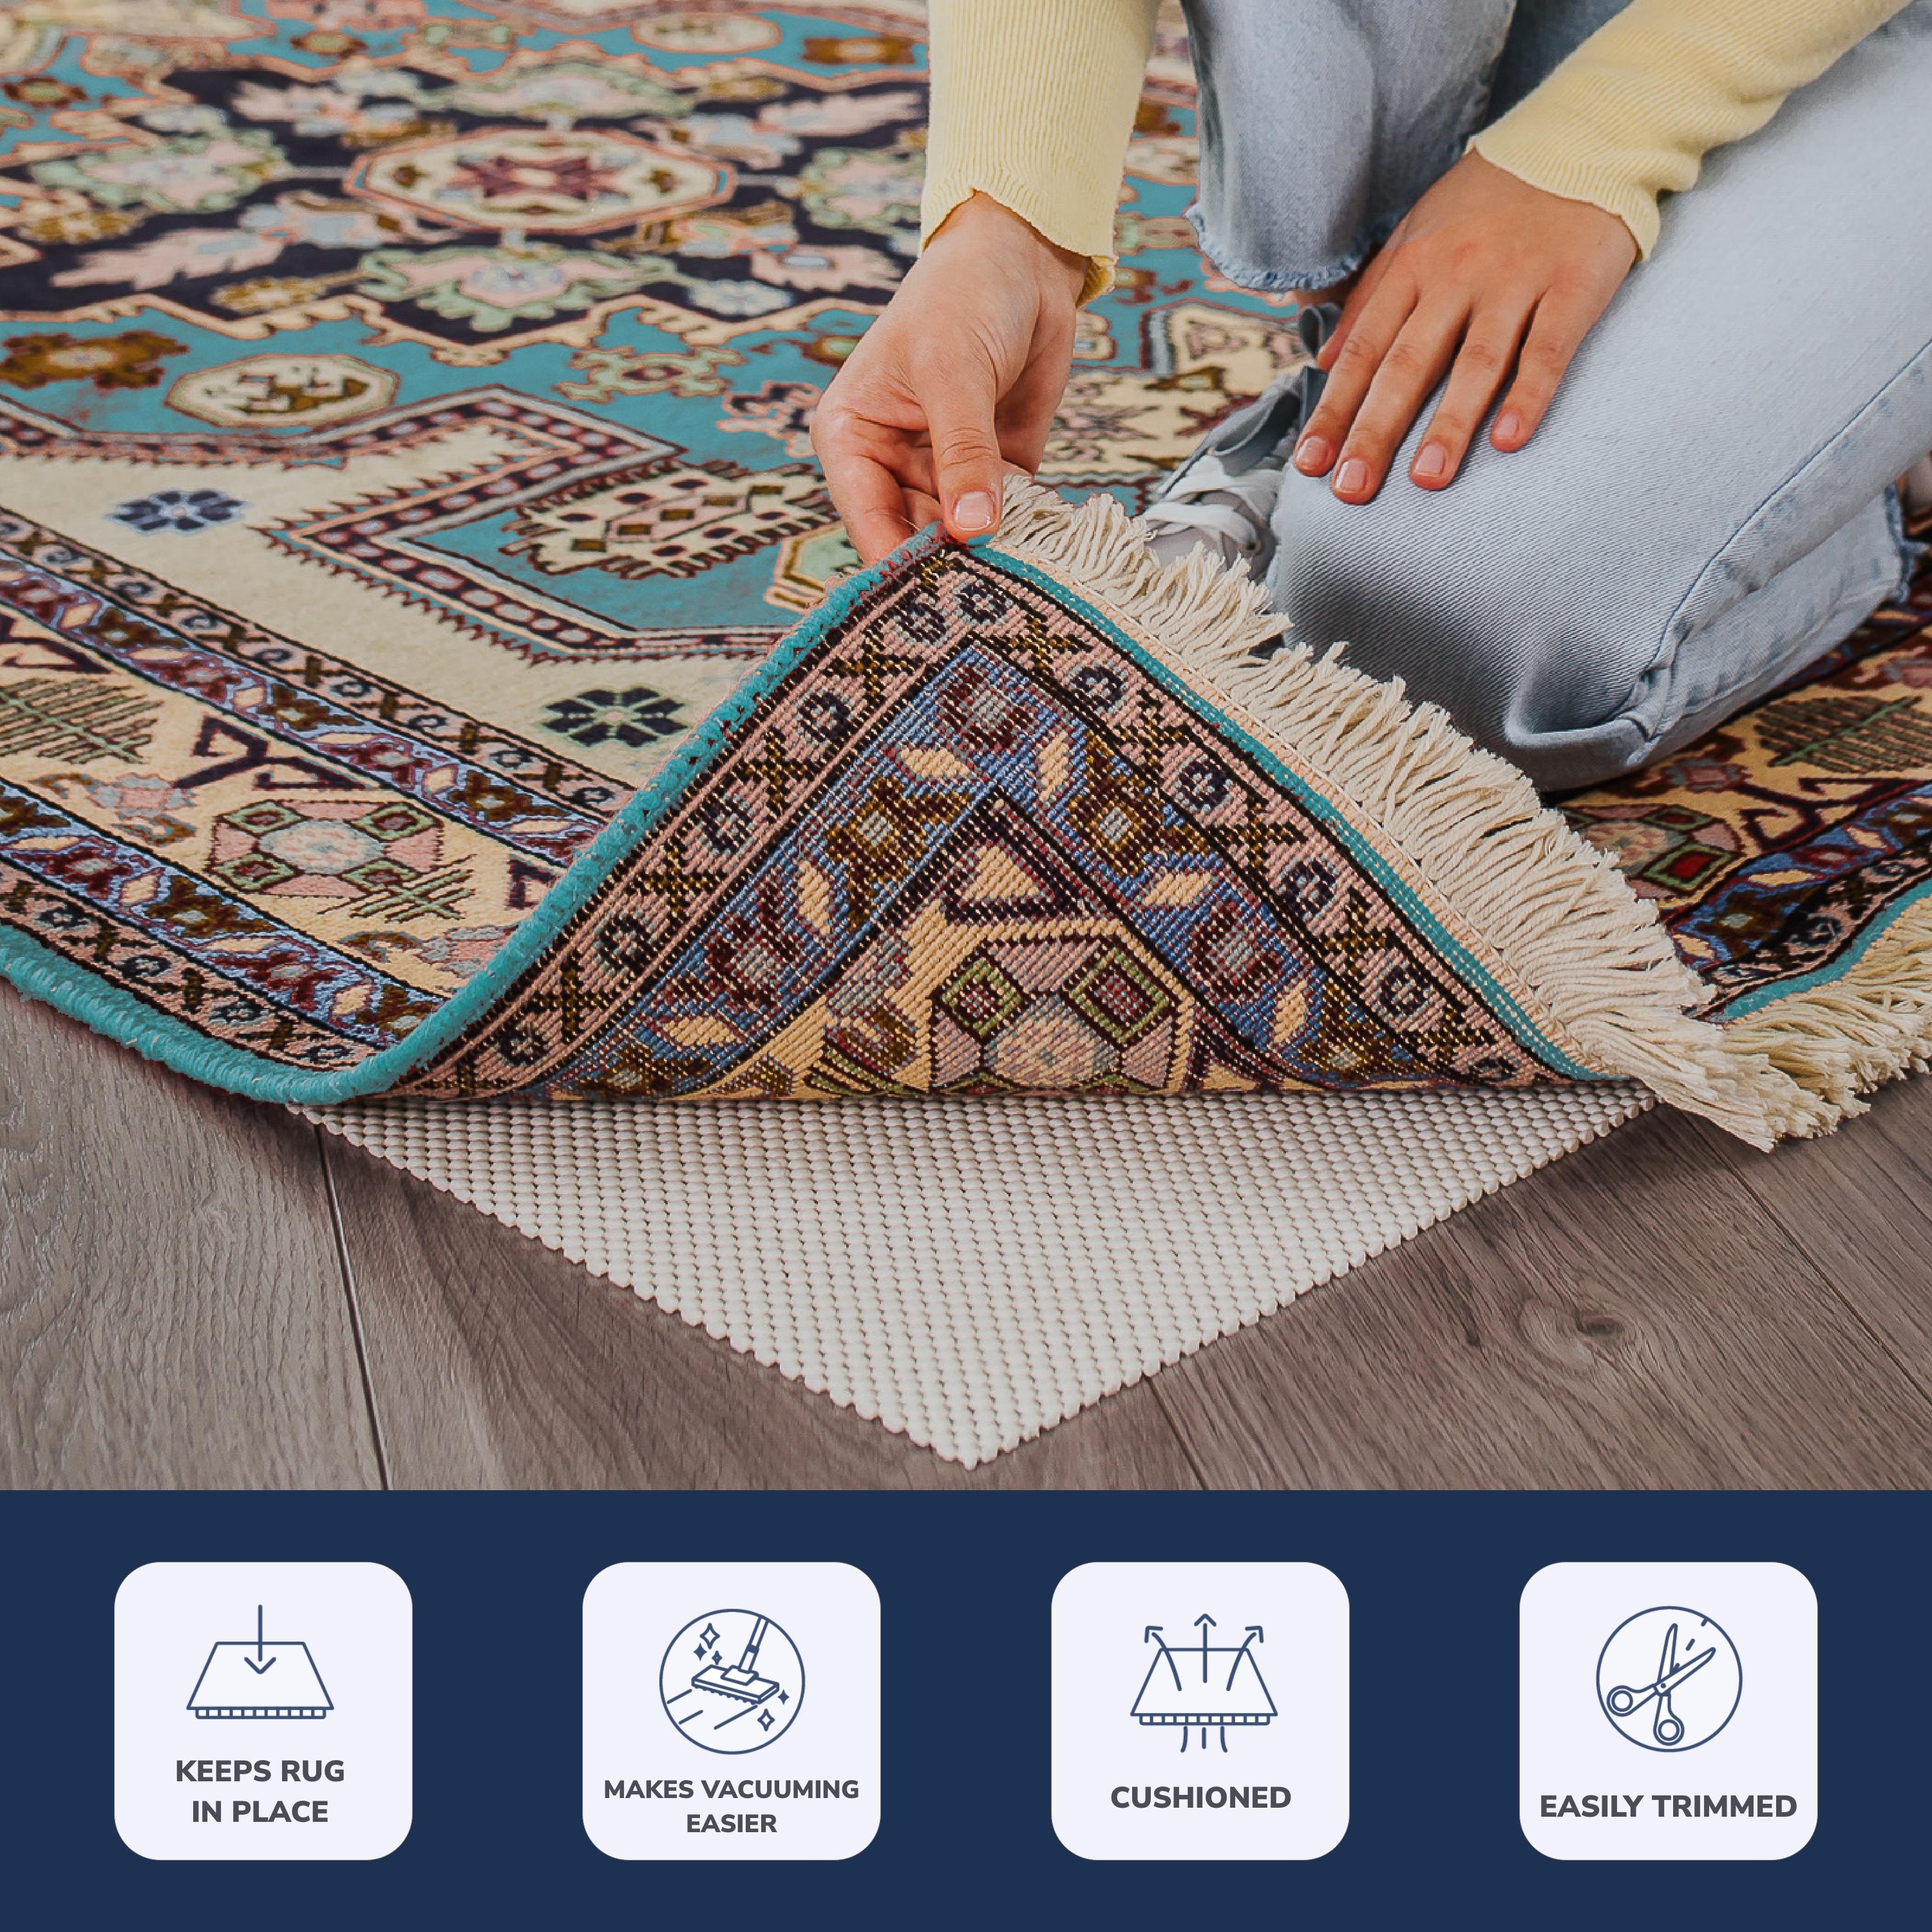 https://ak1.ostkcdn.com/images/products/is/images/direct/3a482a6427cc0789478bc7e31e01ad1a9b61052b/Super-Grip-Non-Slip-Rug-Pad-by-Slip-Stop.jpg